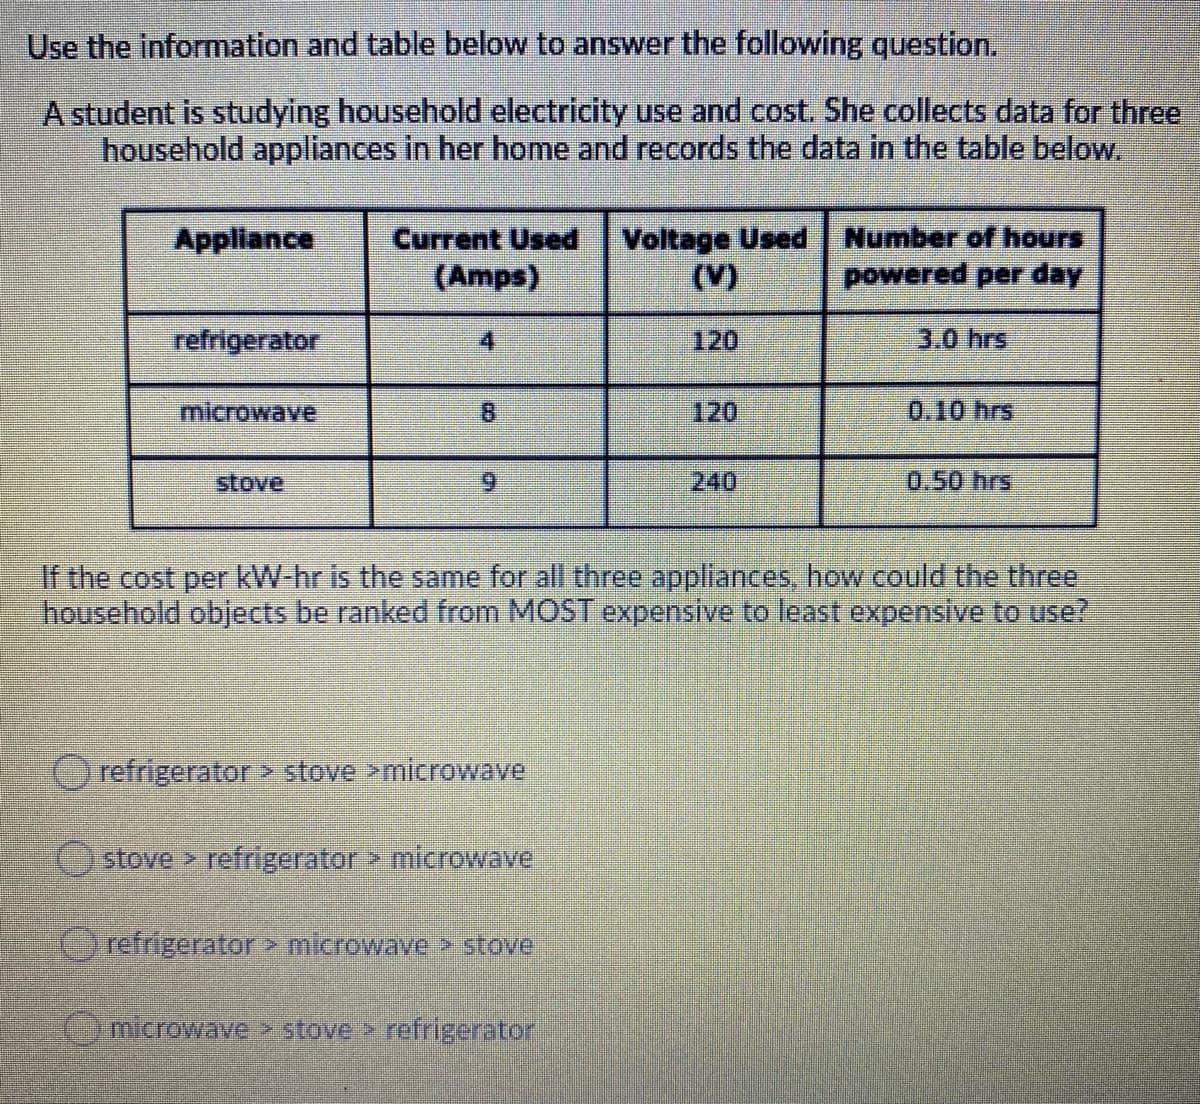 Use the information and table below to answer the following question.
A student is studying household electricity use and cost. She collects data for three
household appliances in her home and records the data in the table below.
Voltage Used | Number of hours
(V)
Appliance
Current Used
(Amps)
powered per day
refrigerator
4
120
3.0 hrs
microwave
120
0.10 hrs
stove
6.
240
0.50 hrs
If the cost per kW-hr is the same for all three appliances, how could the three
household objects be ranked from MOST expensive to least expensive to use?
refrigerator stove >microwave
stove refrigerator > microwave
refrigerator>microwave > stove
6)microwave stove refrigerator
8.
